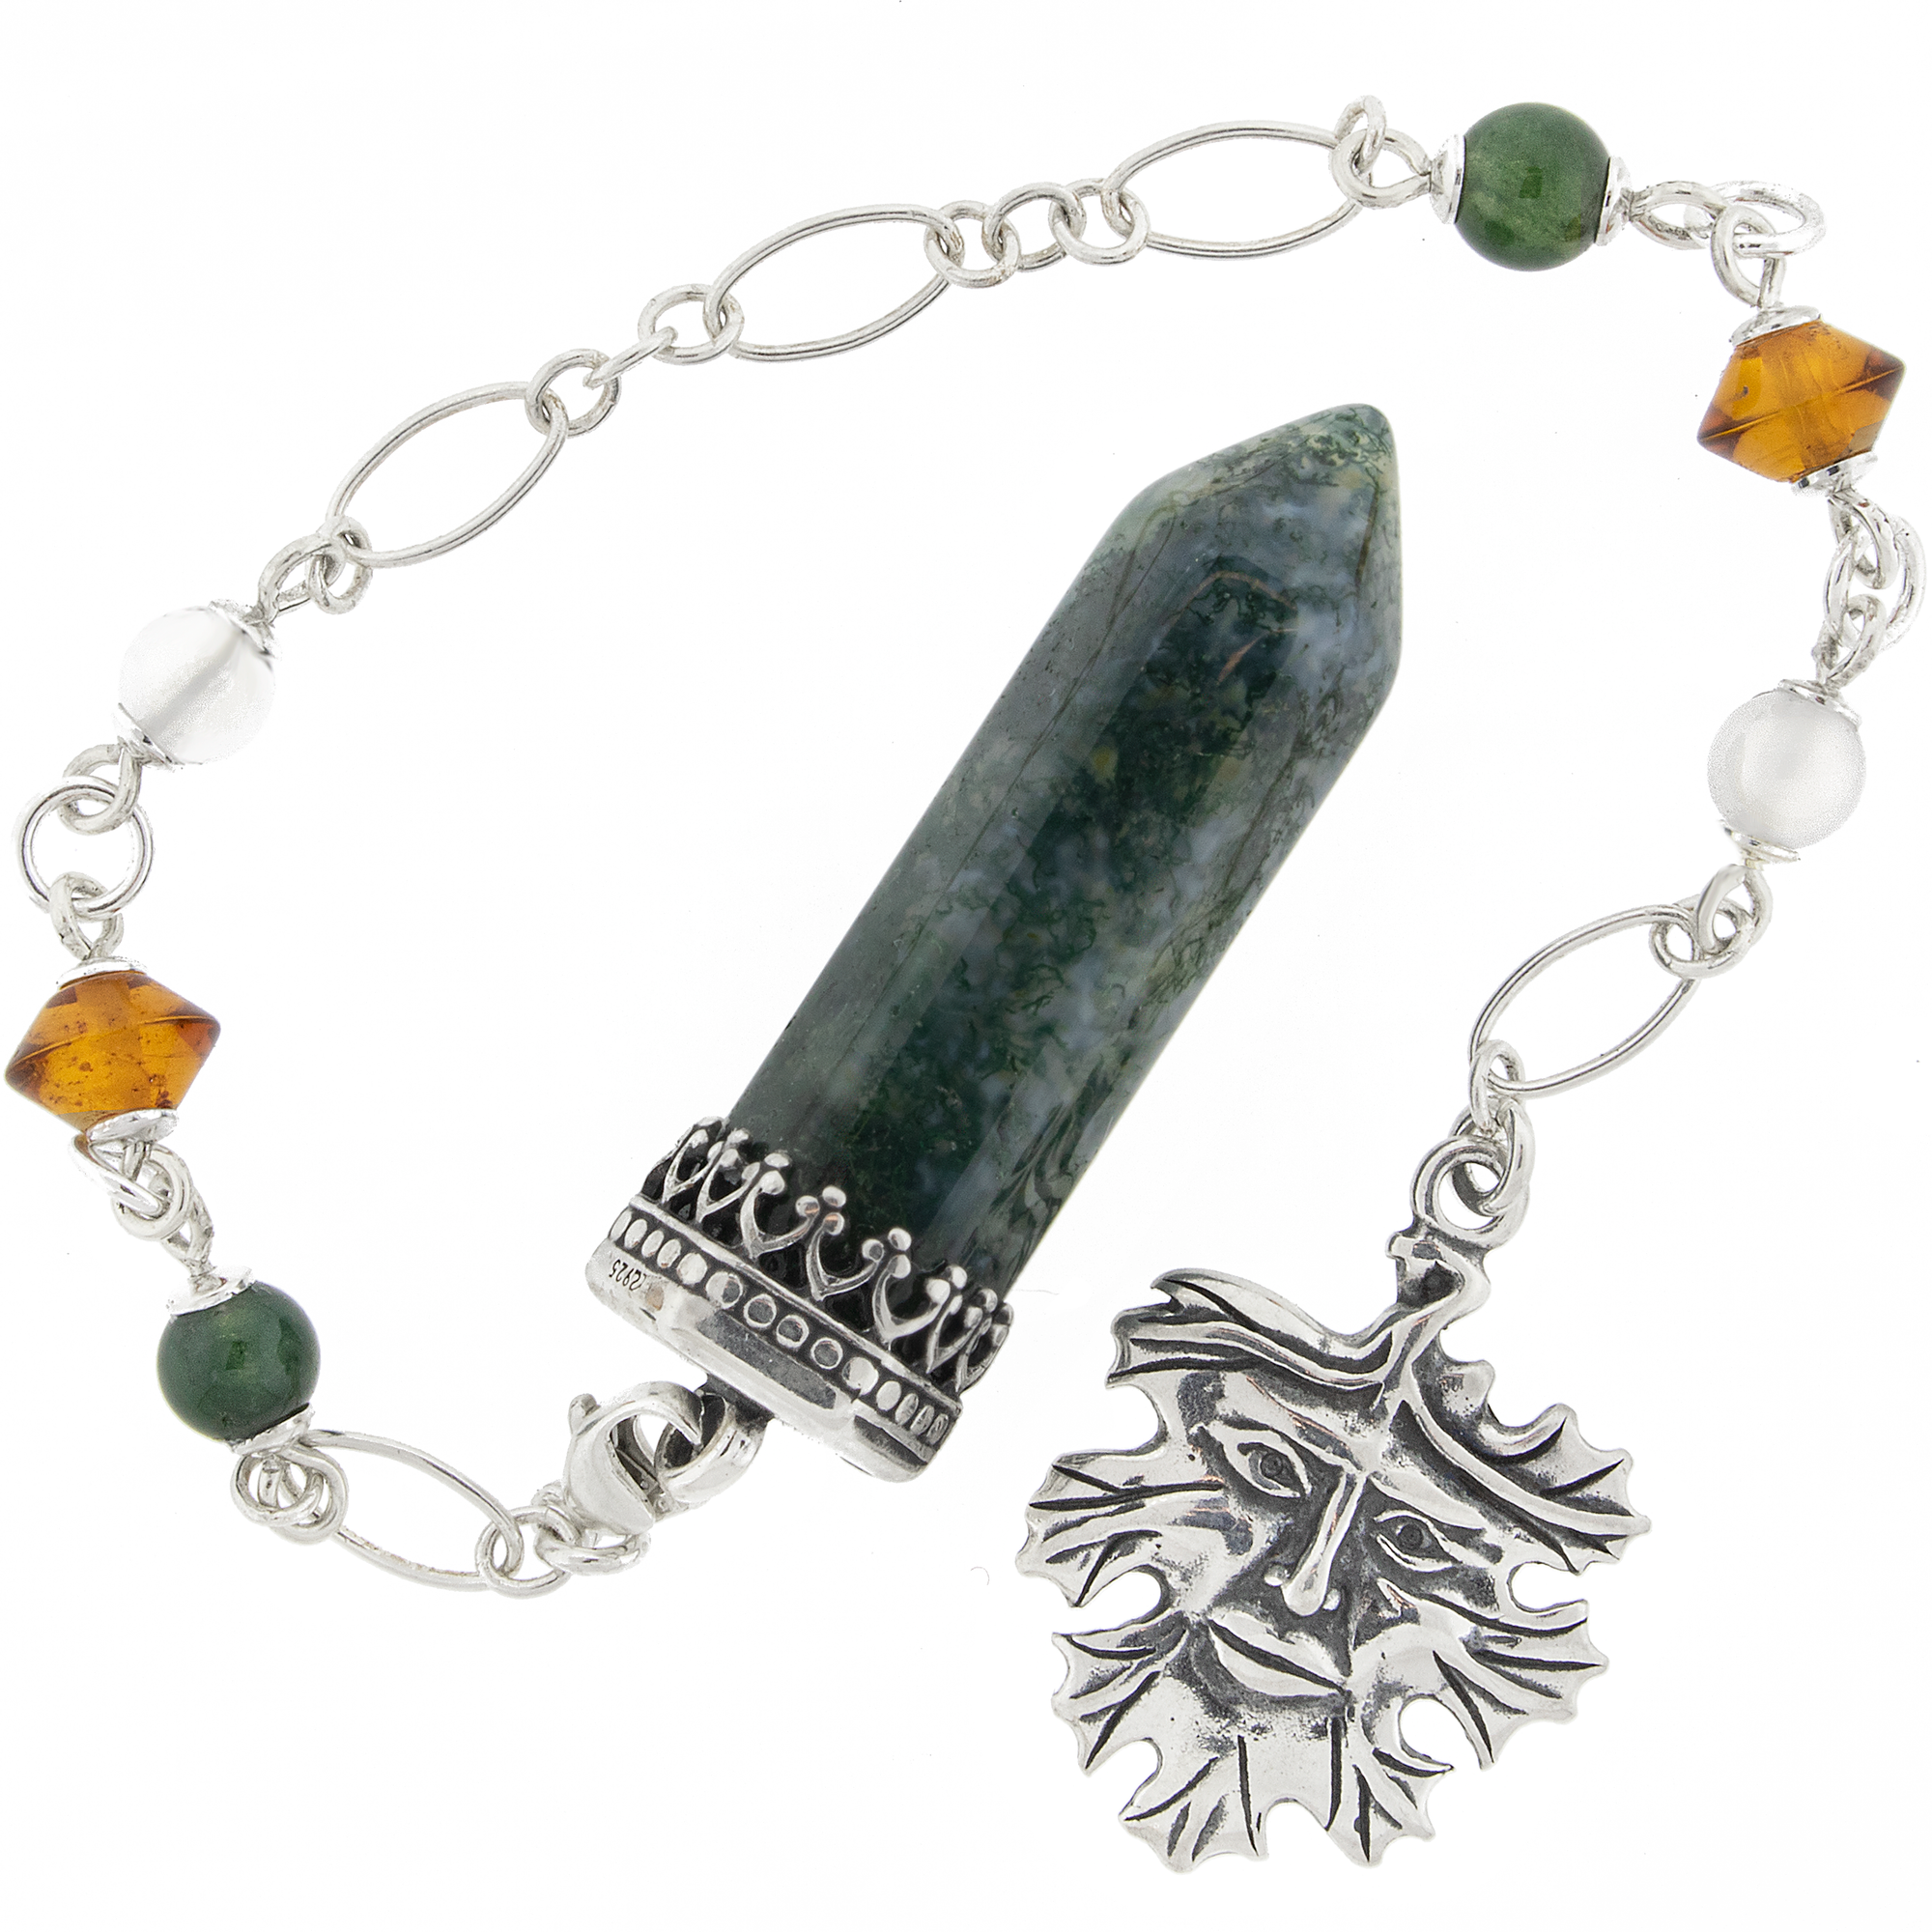 One of a Kind #373 - Moss Agate, Baltic Amber, White Agate and Sterling Silver Pendulum by Ask Your Pendulum